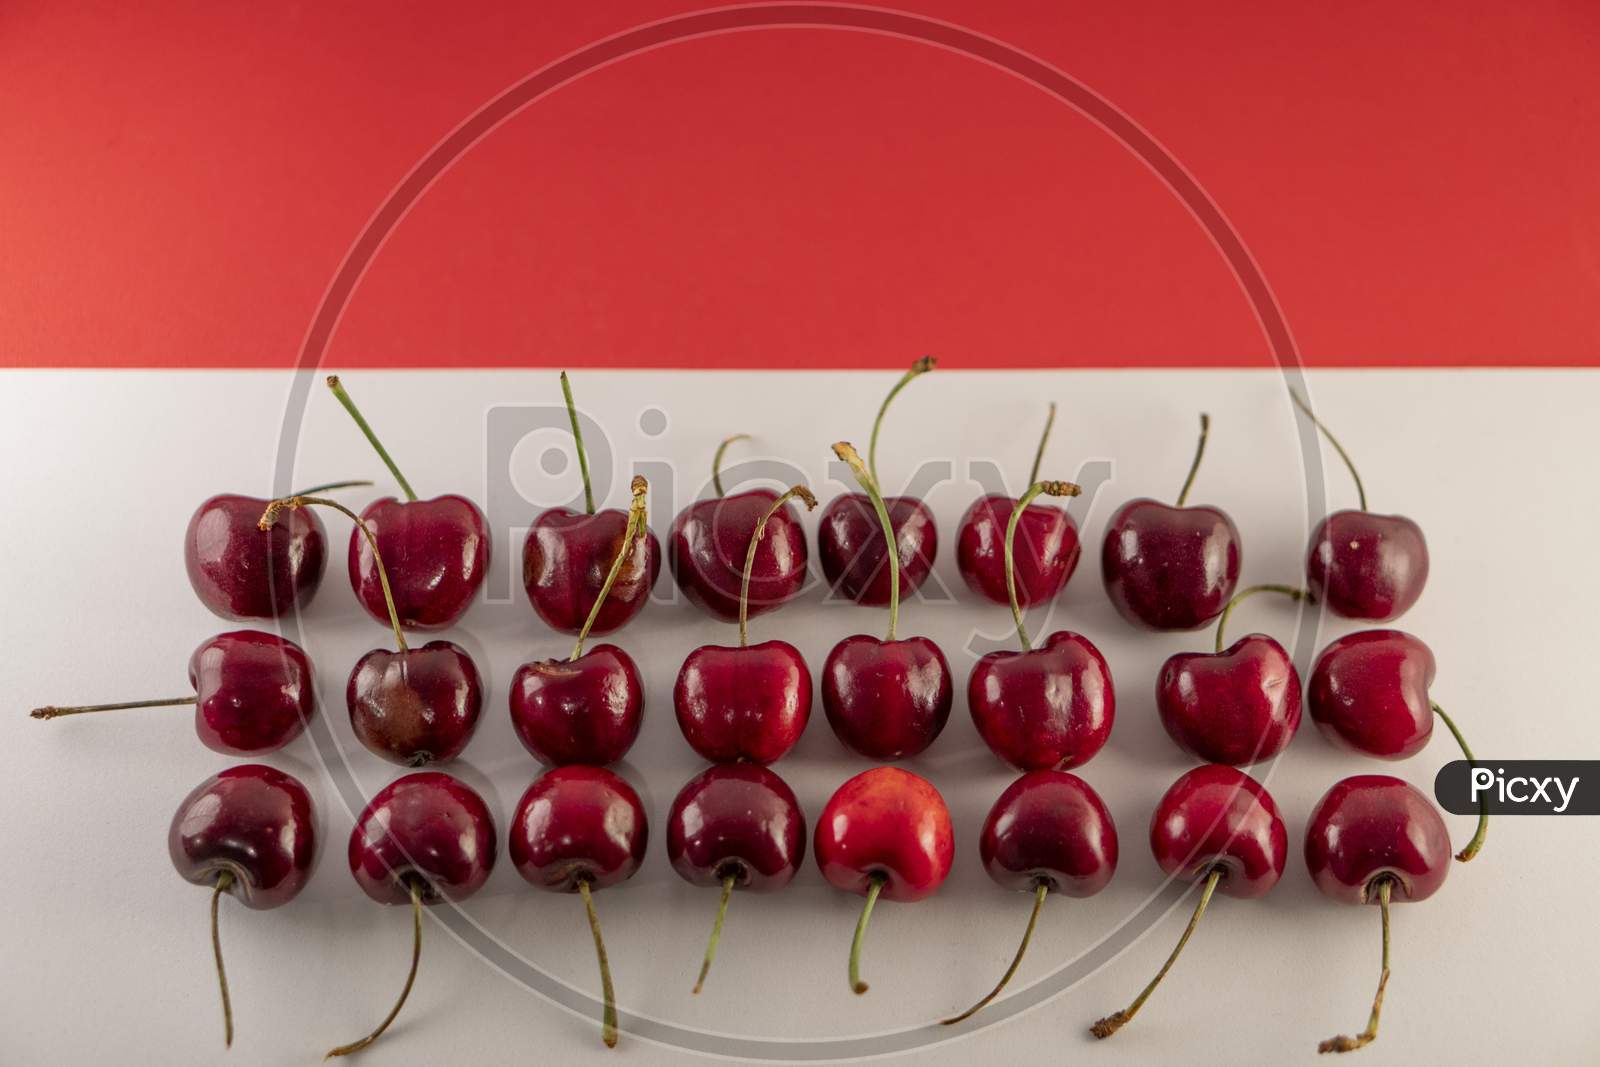 Fresh red cherries on a red and white background. Photo has empty space for text.